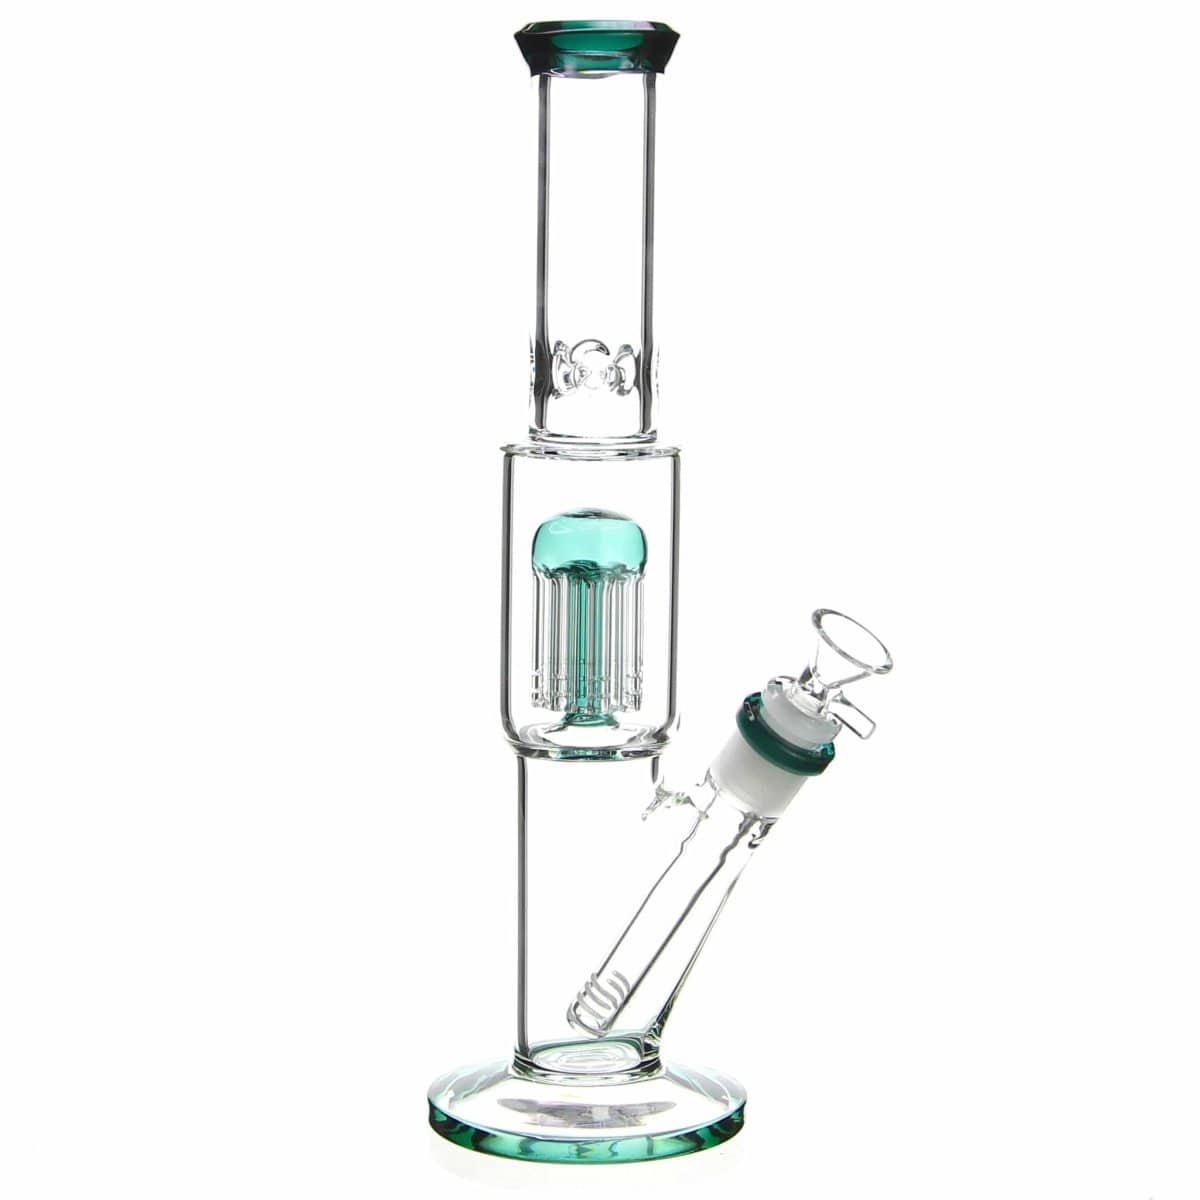 Benext Generation Glass Teal Canned Jellyfish Straight Tube